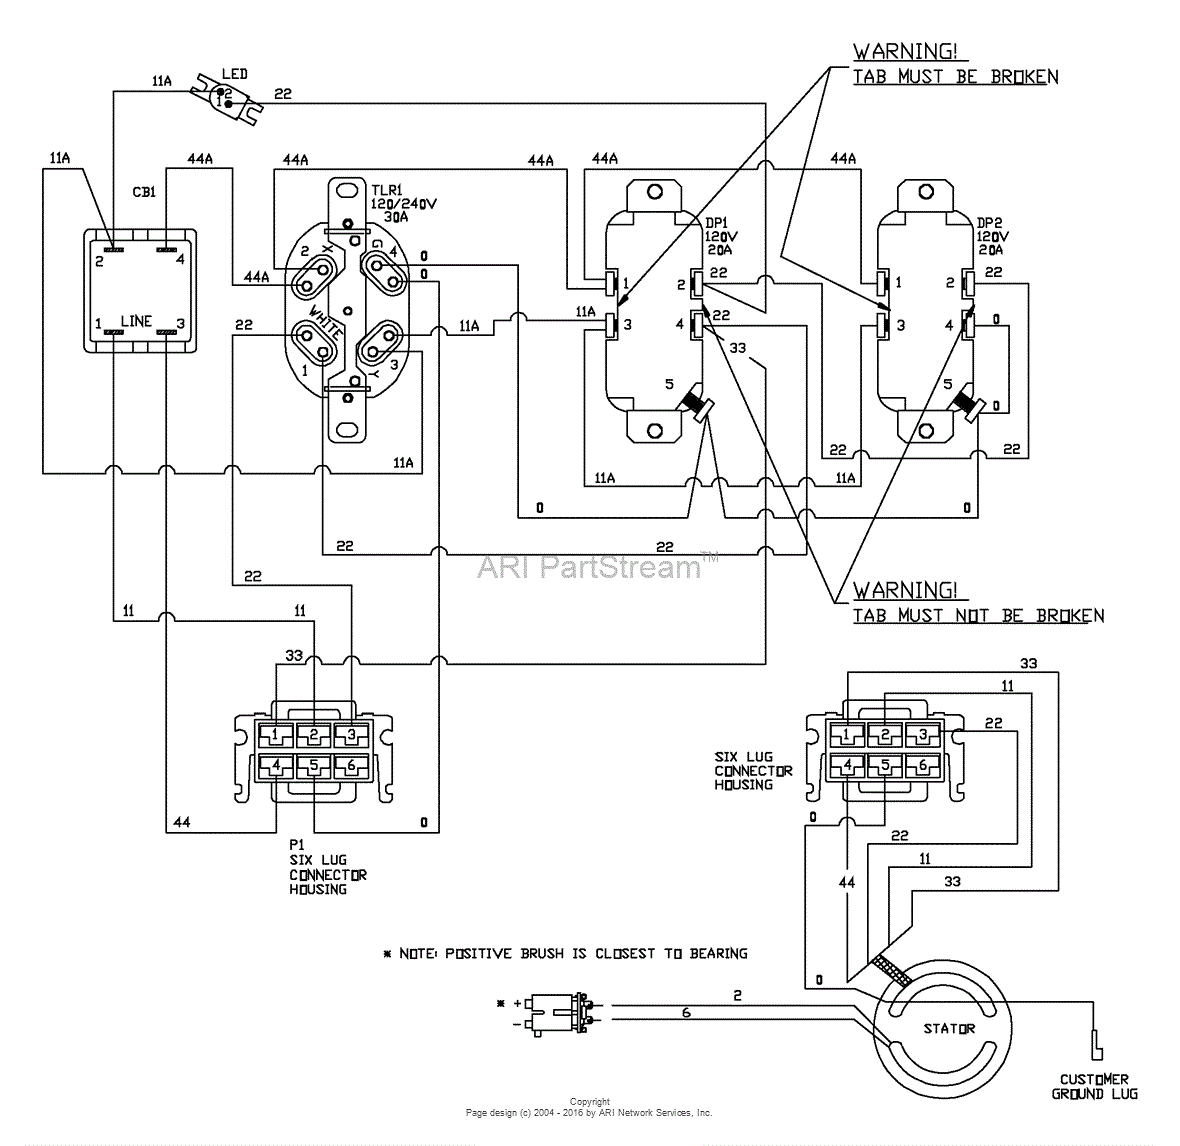 Briggs and Stratton Power Products 030324-0 - 5,550 Watt ... k amp r switch panel wiring diagram 